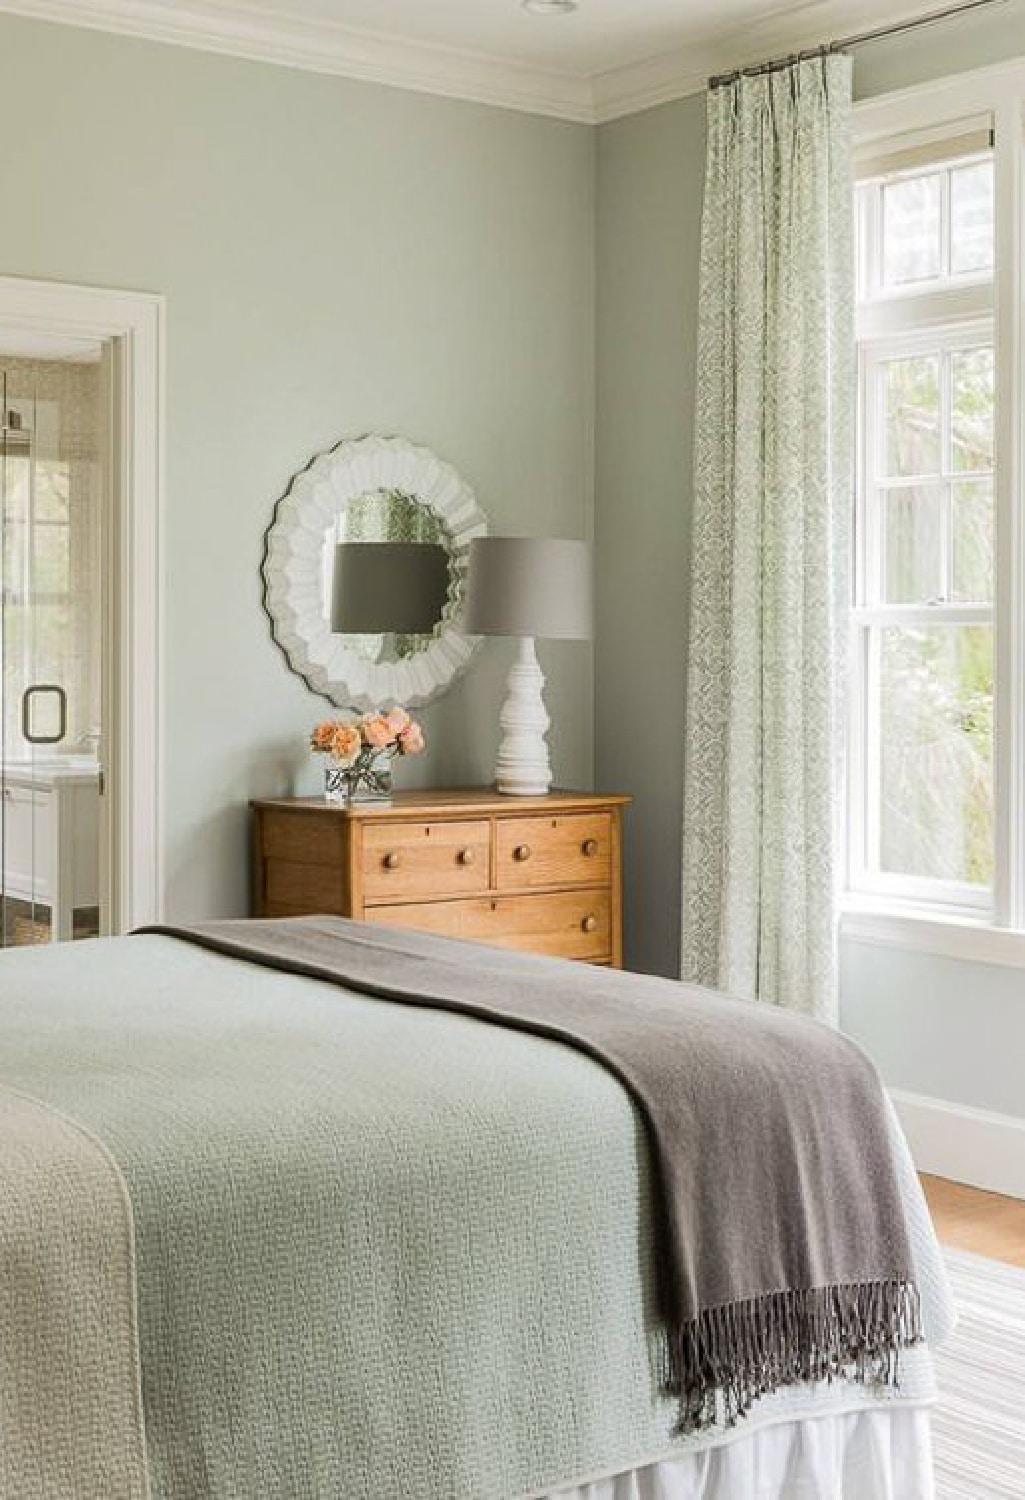 45 Best Bedroom Paint Colors 2023 - Color Ideas for Bedroom